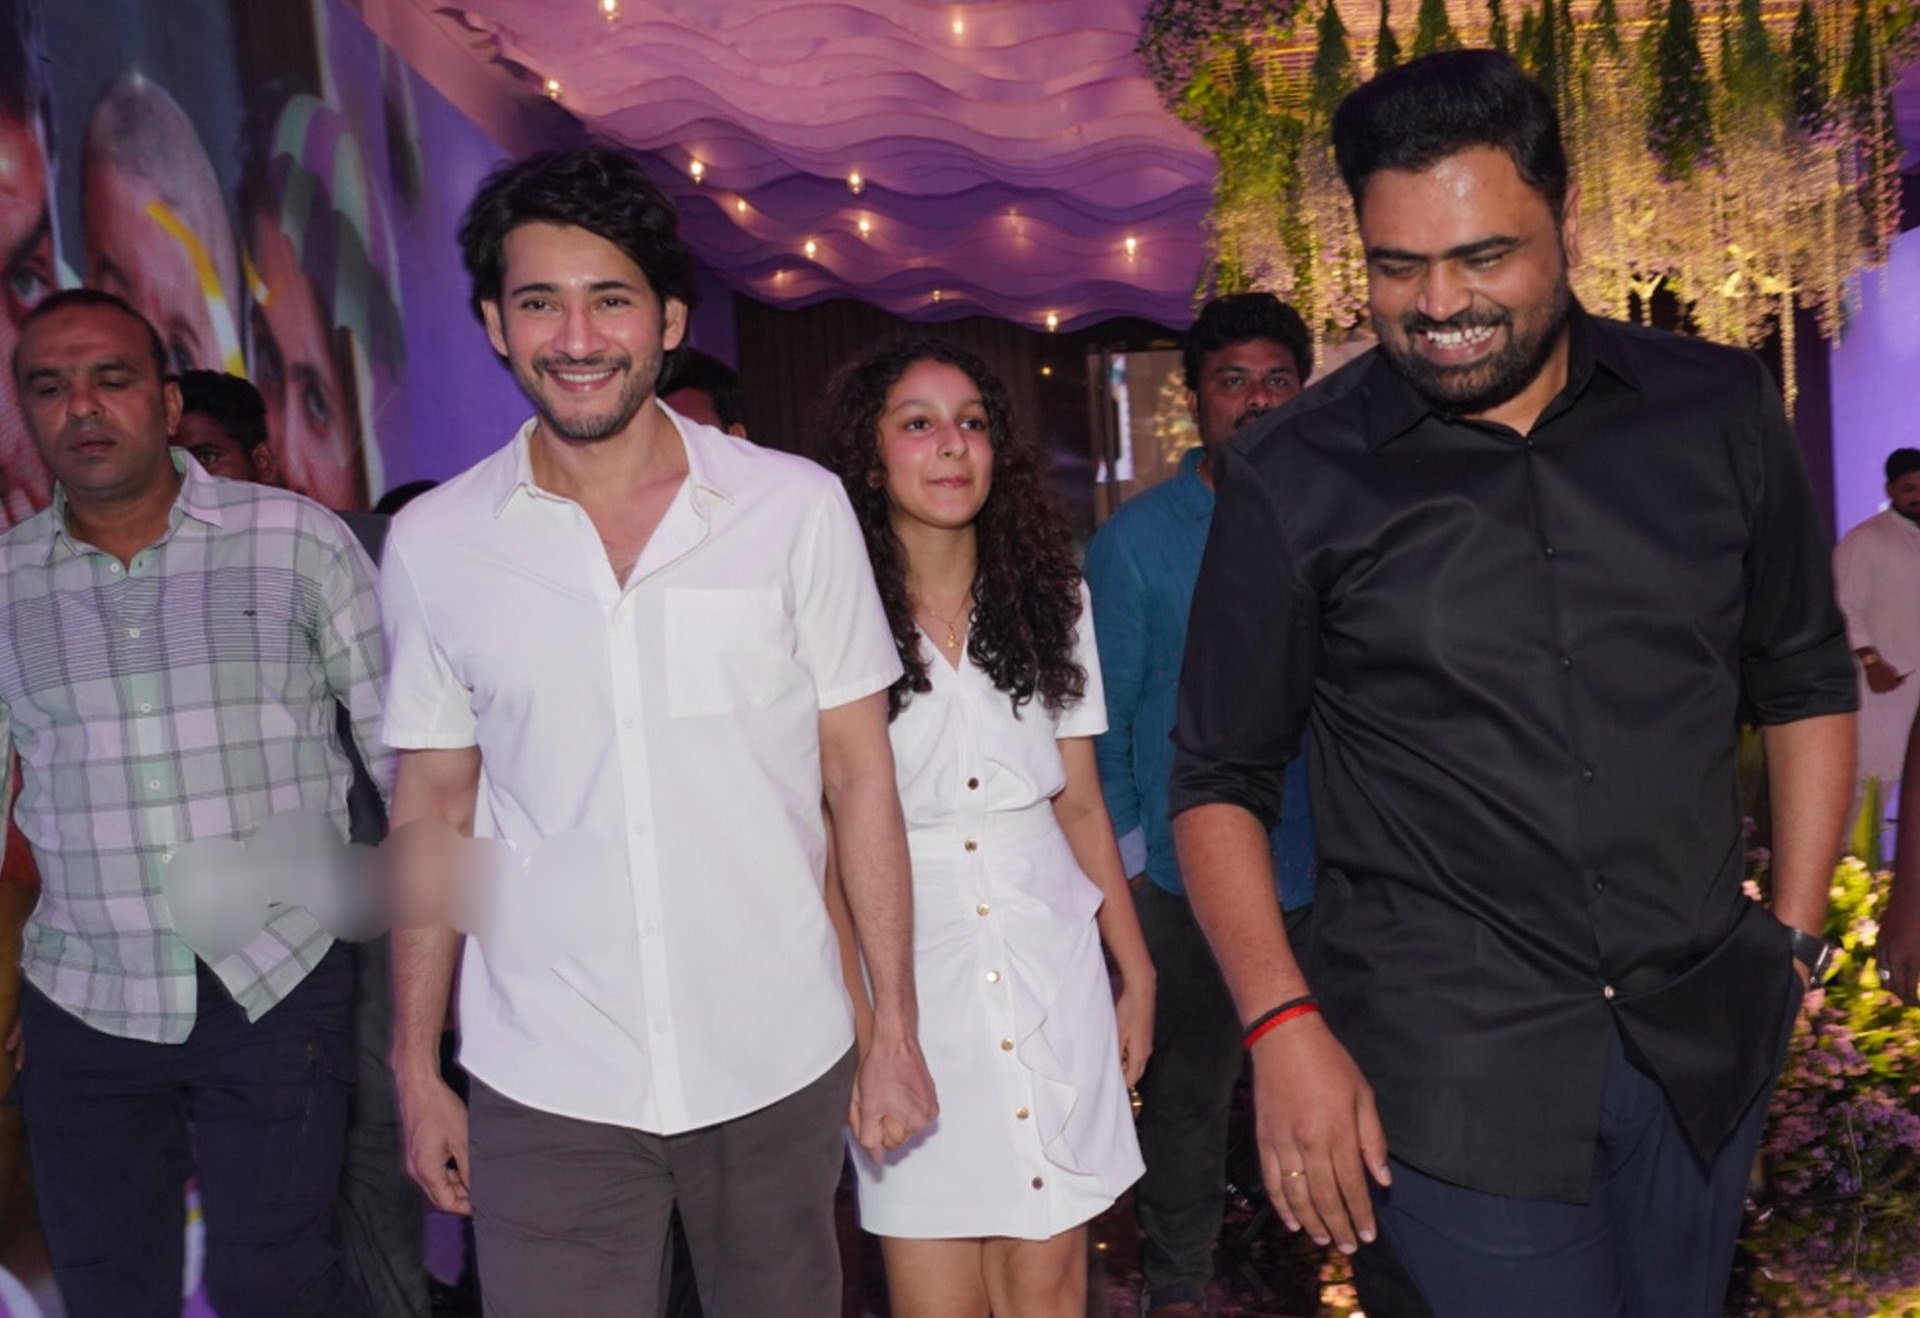  Mahesh Babu And Sitara Steal The Show In Matching White Outfits At Dil Raju̵-TeluguStop.com